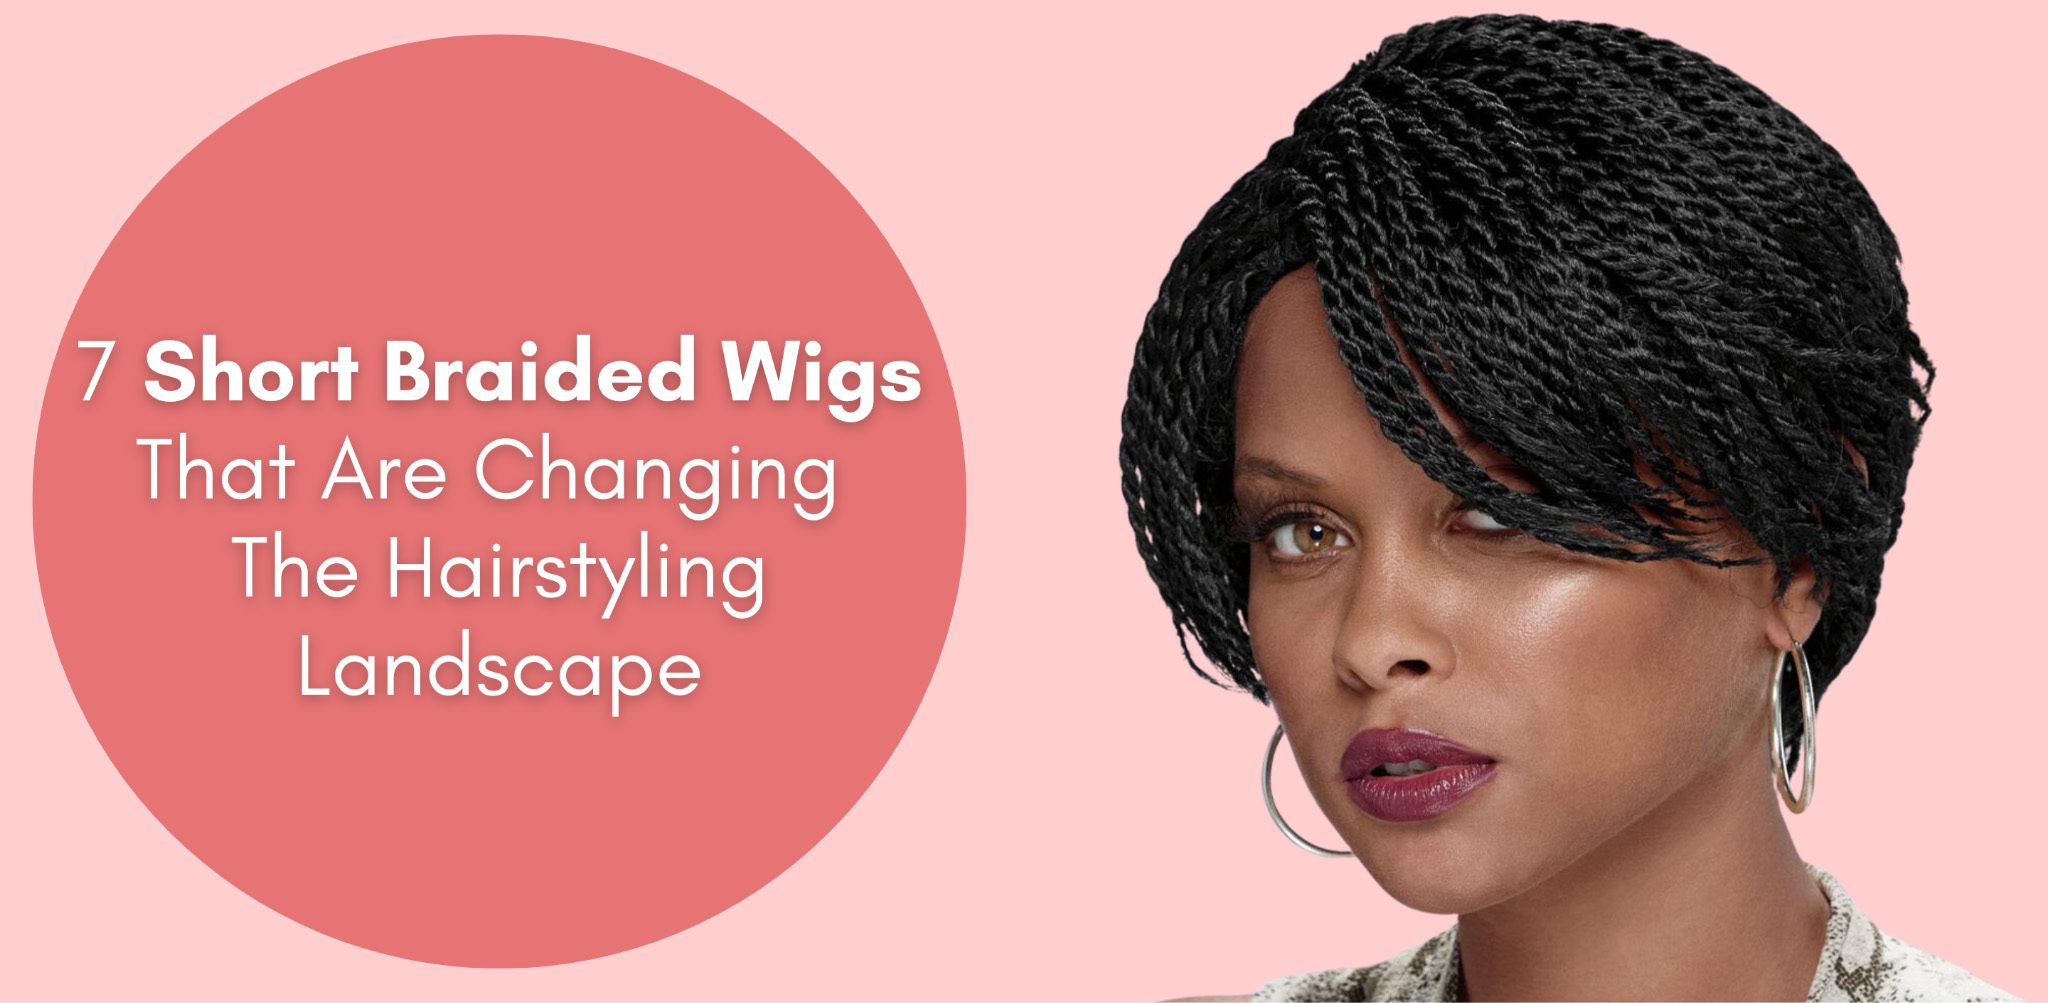 7 Short Braided Wigs That Are Changing The Hairstyling Landscape